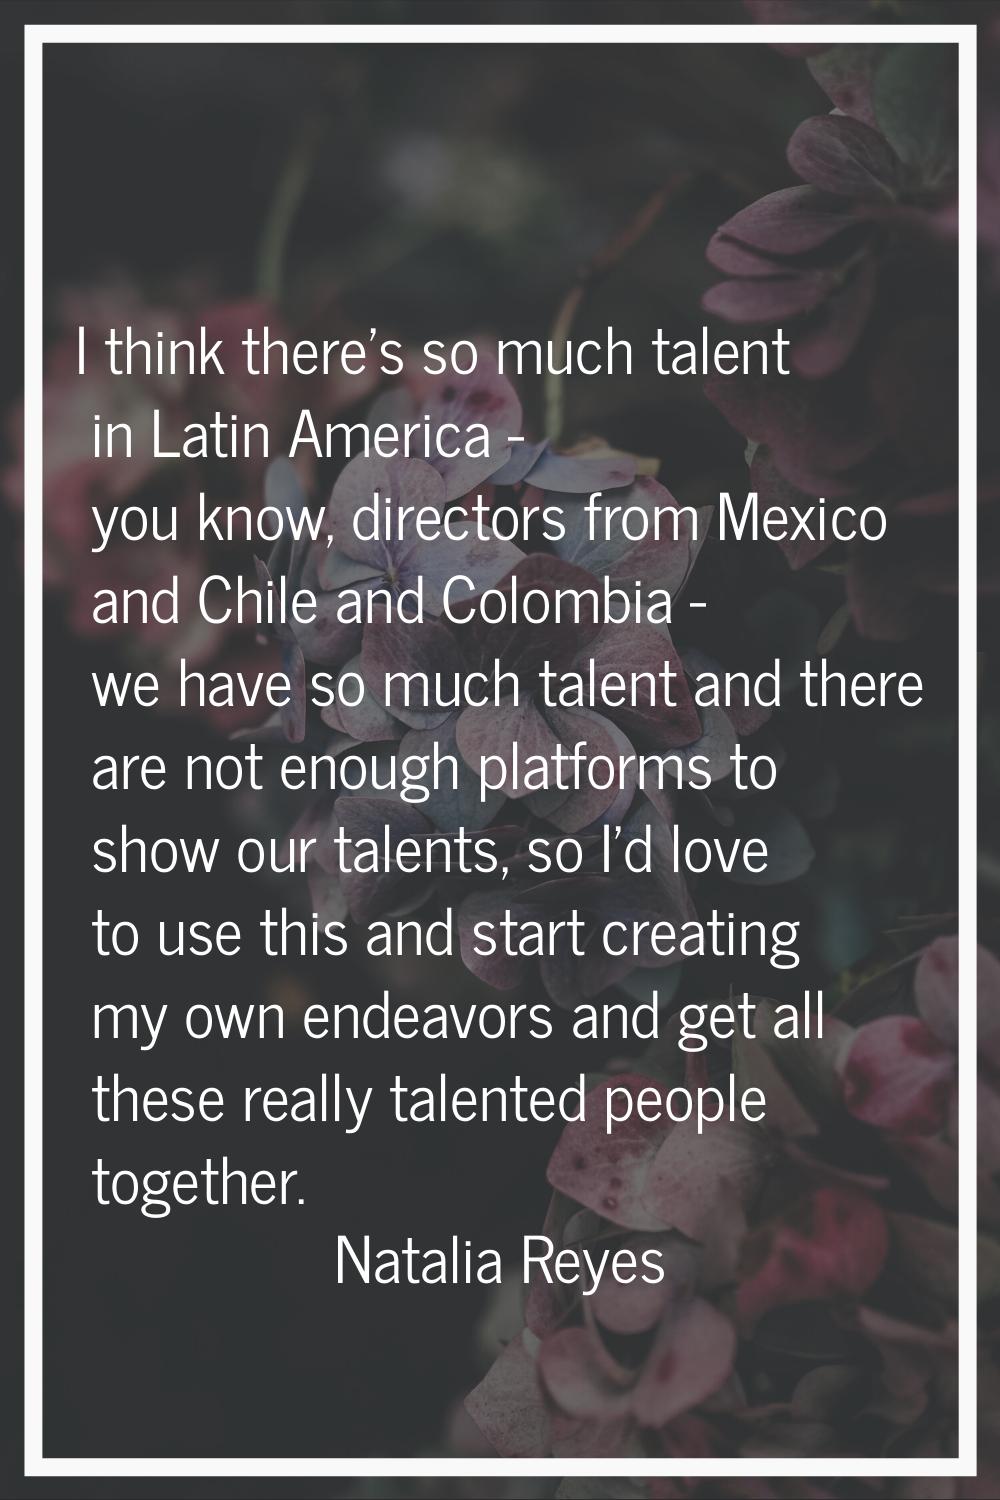 I think there’s so much talent in Latin America - you know, directors from Mexico and Chile and Col